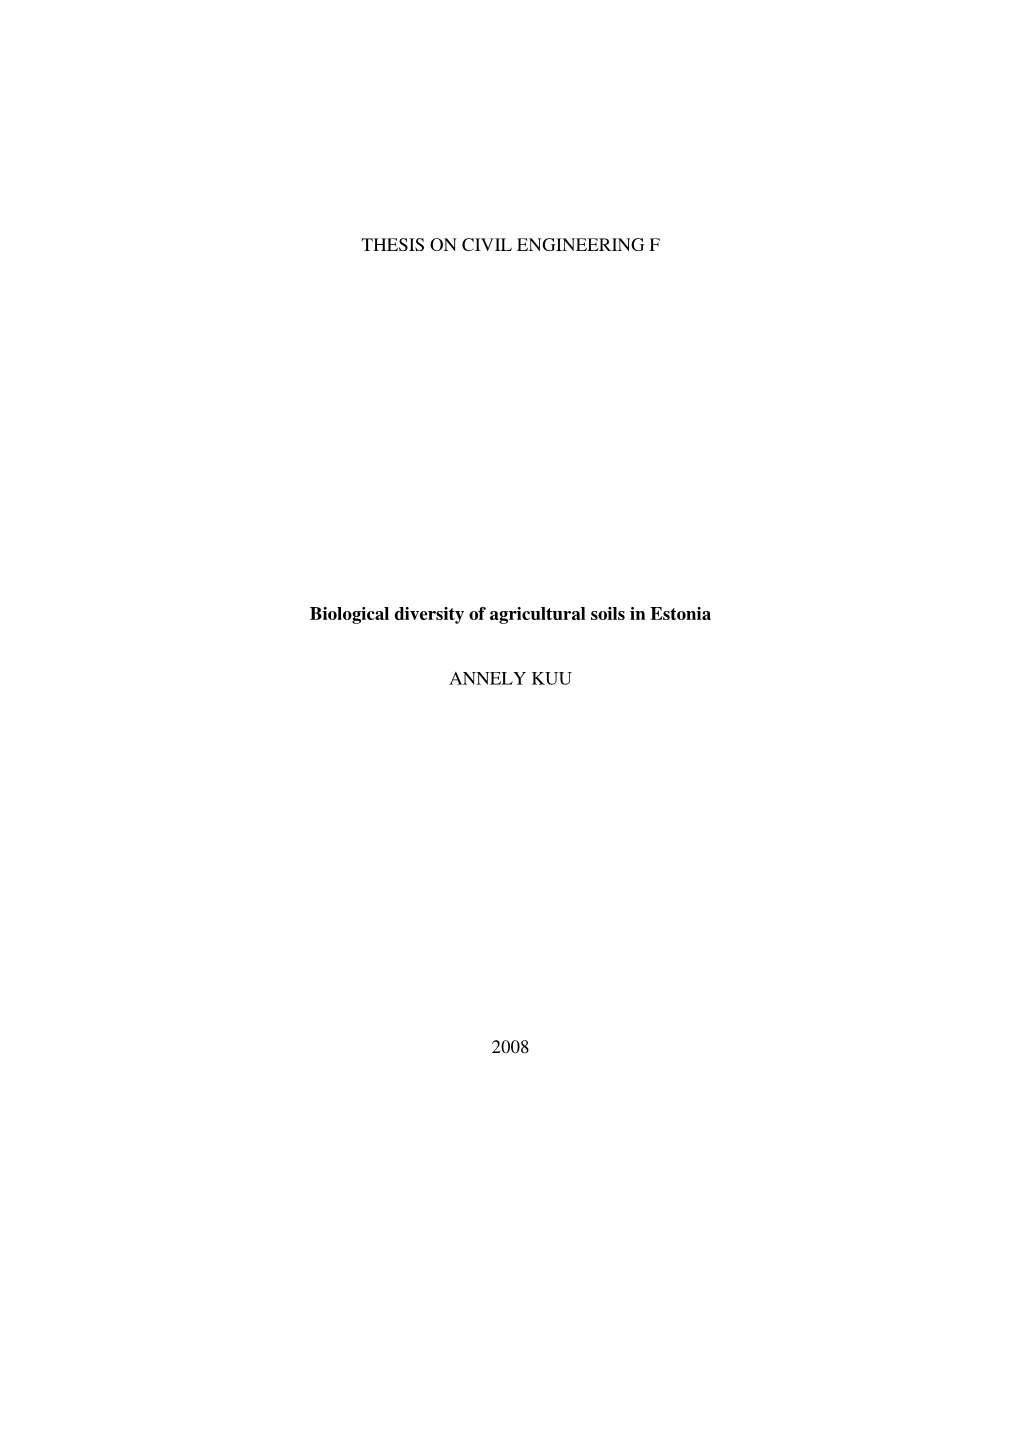 THESIS on CIVIL ENGINEERING F Biological Diversity Of